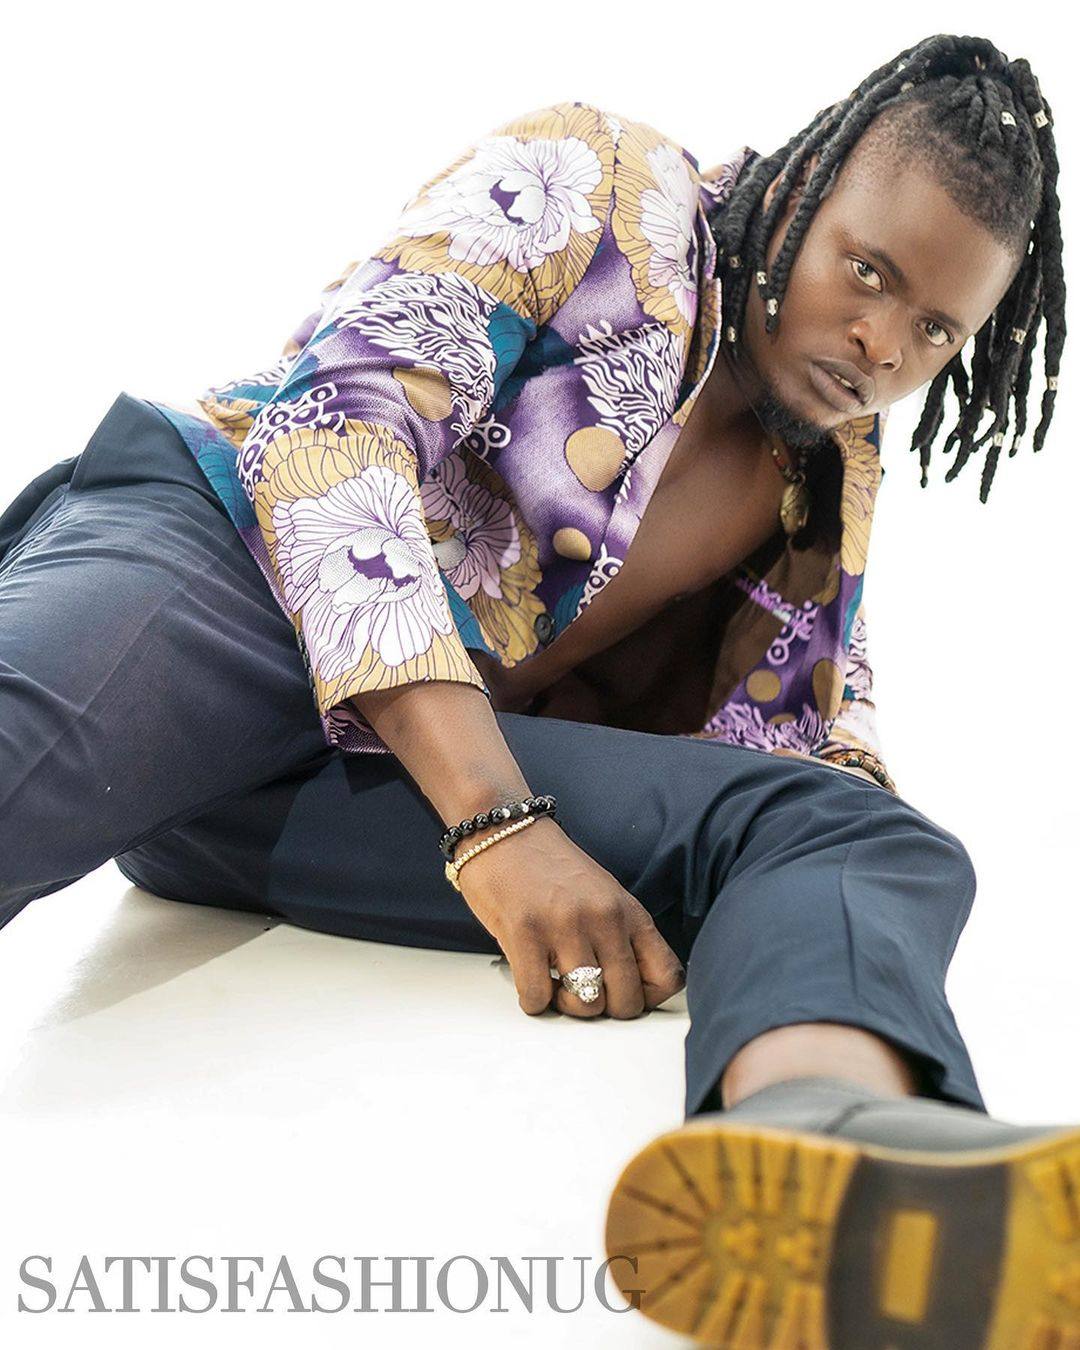 How Pallaso Lost his Facebook Page